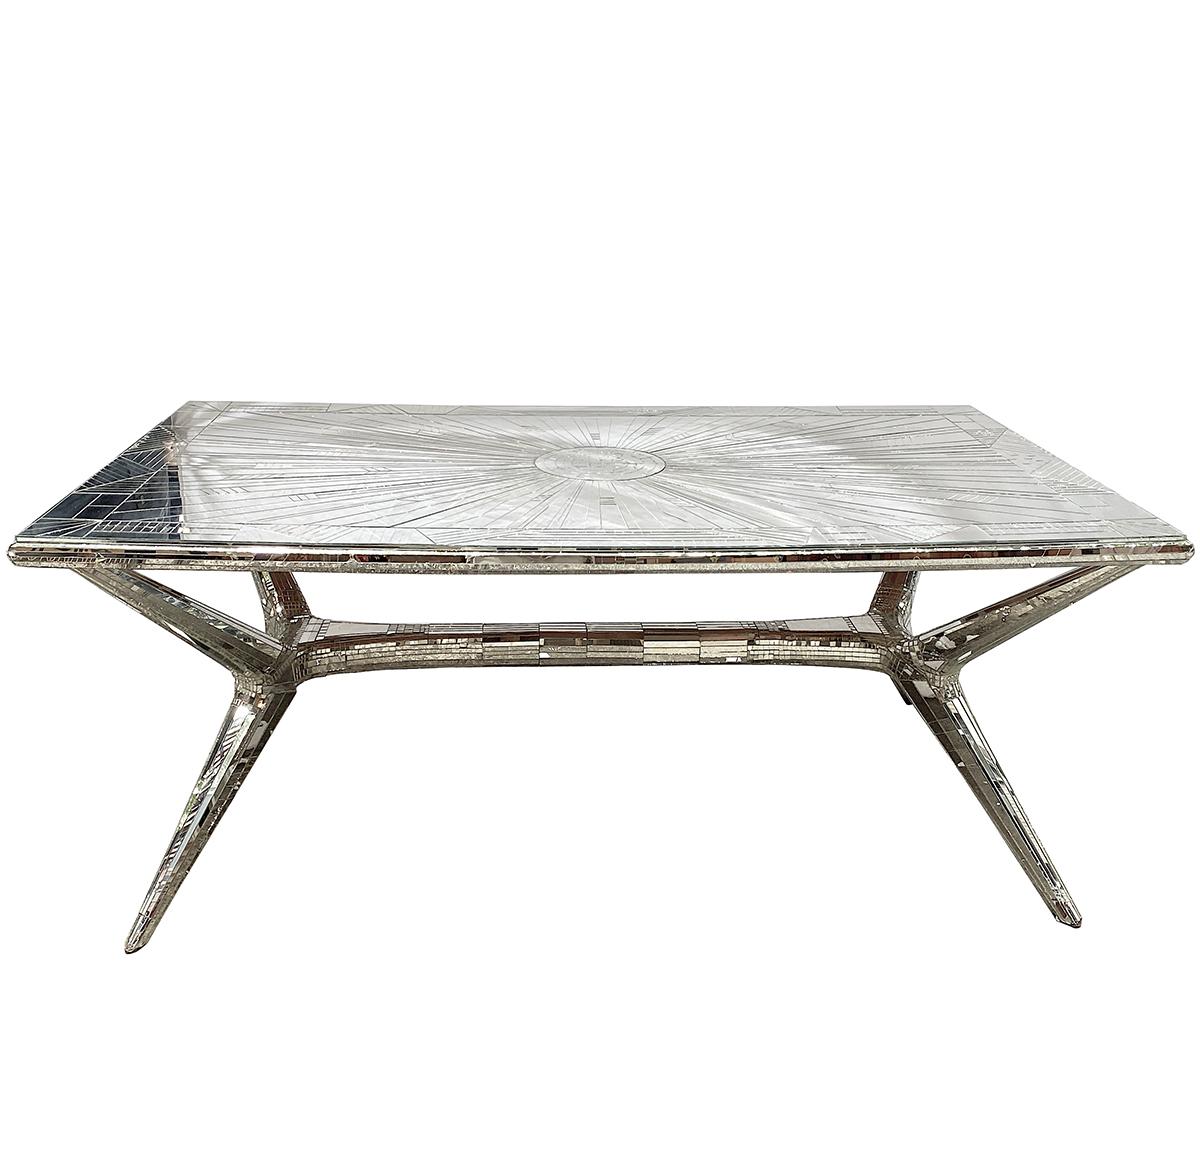 A French circa 1960's mirror mosaic table. 

Measurements:
Height: 31.5